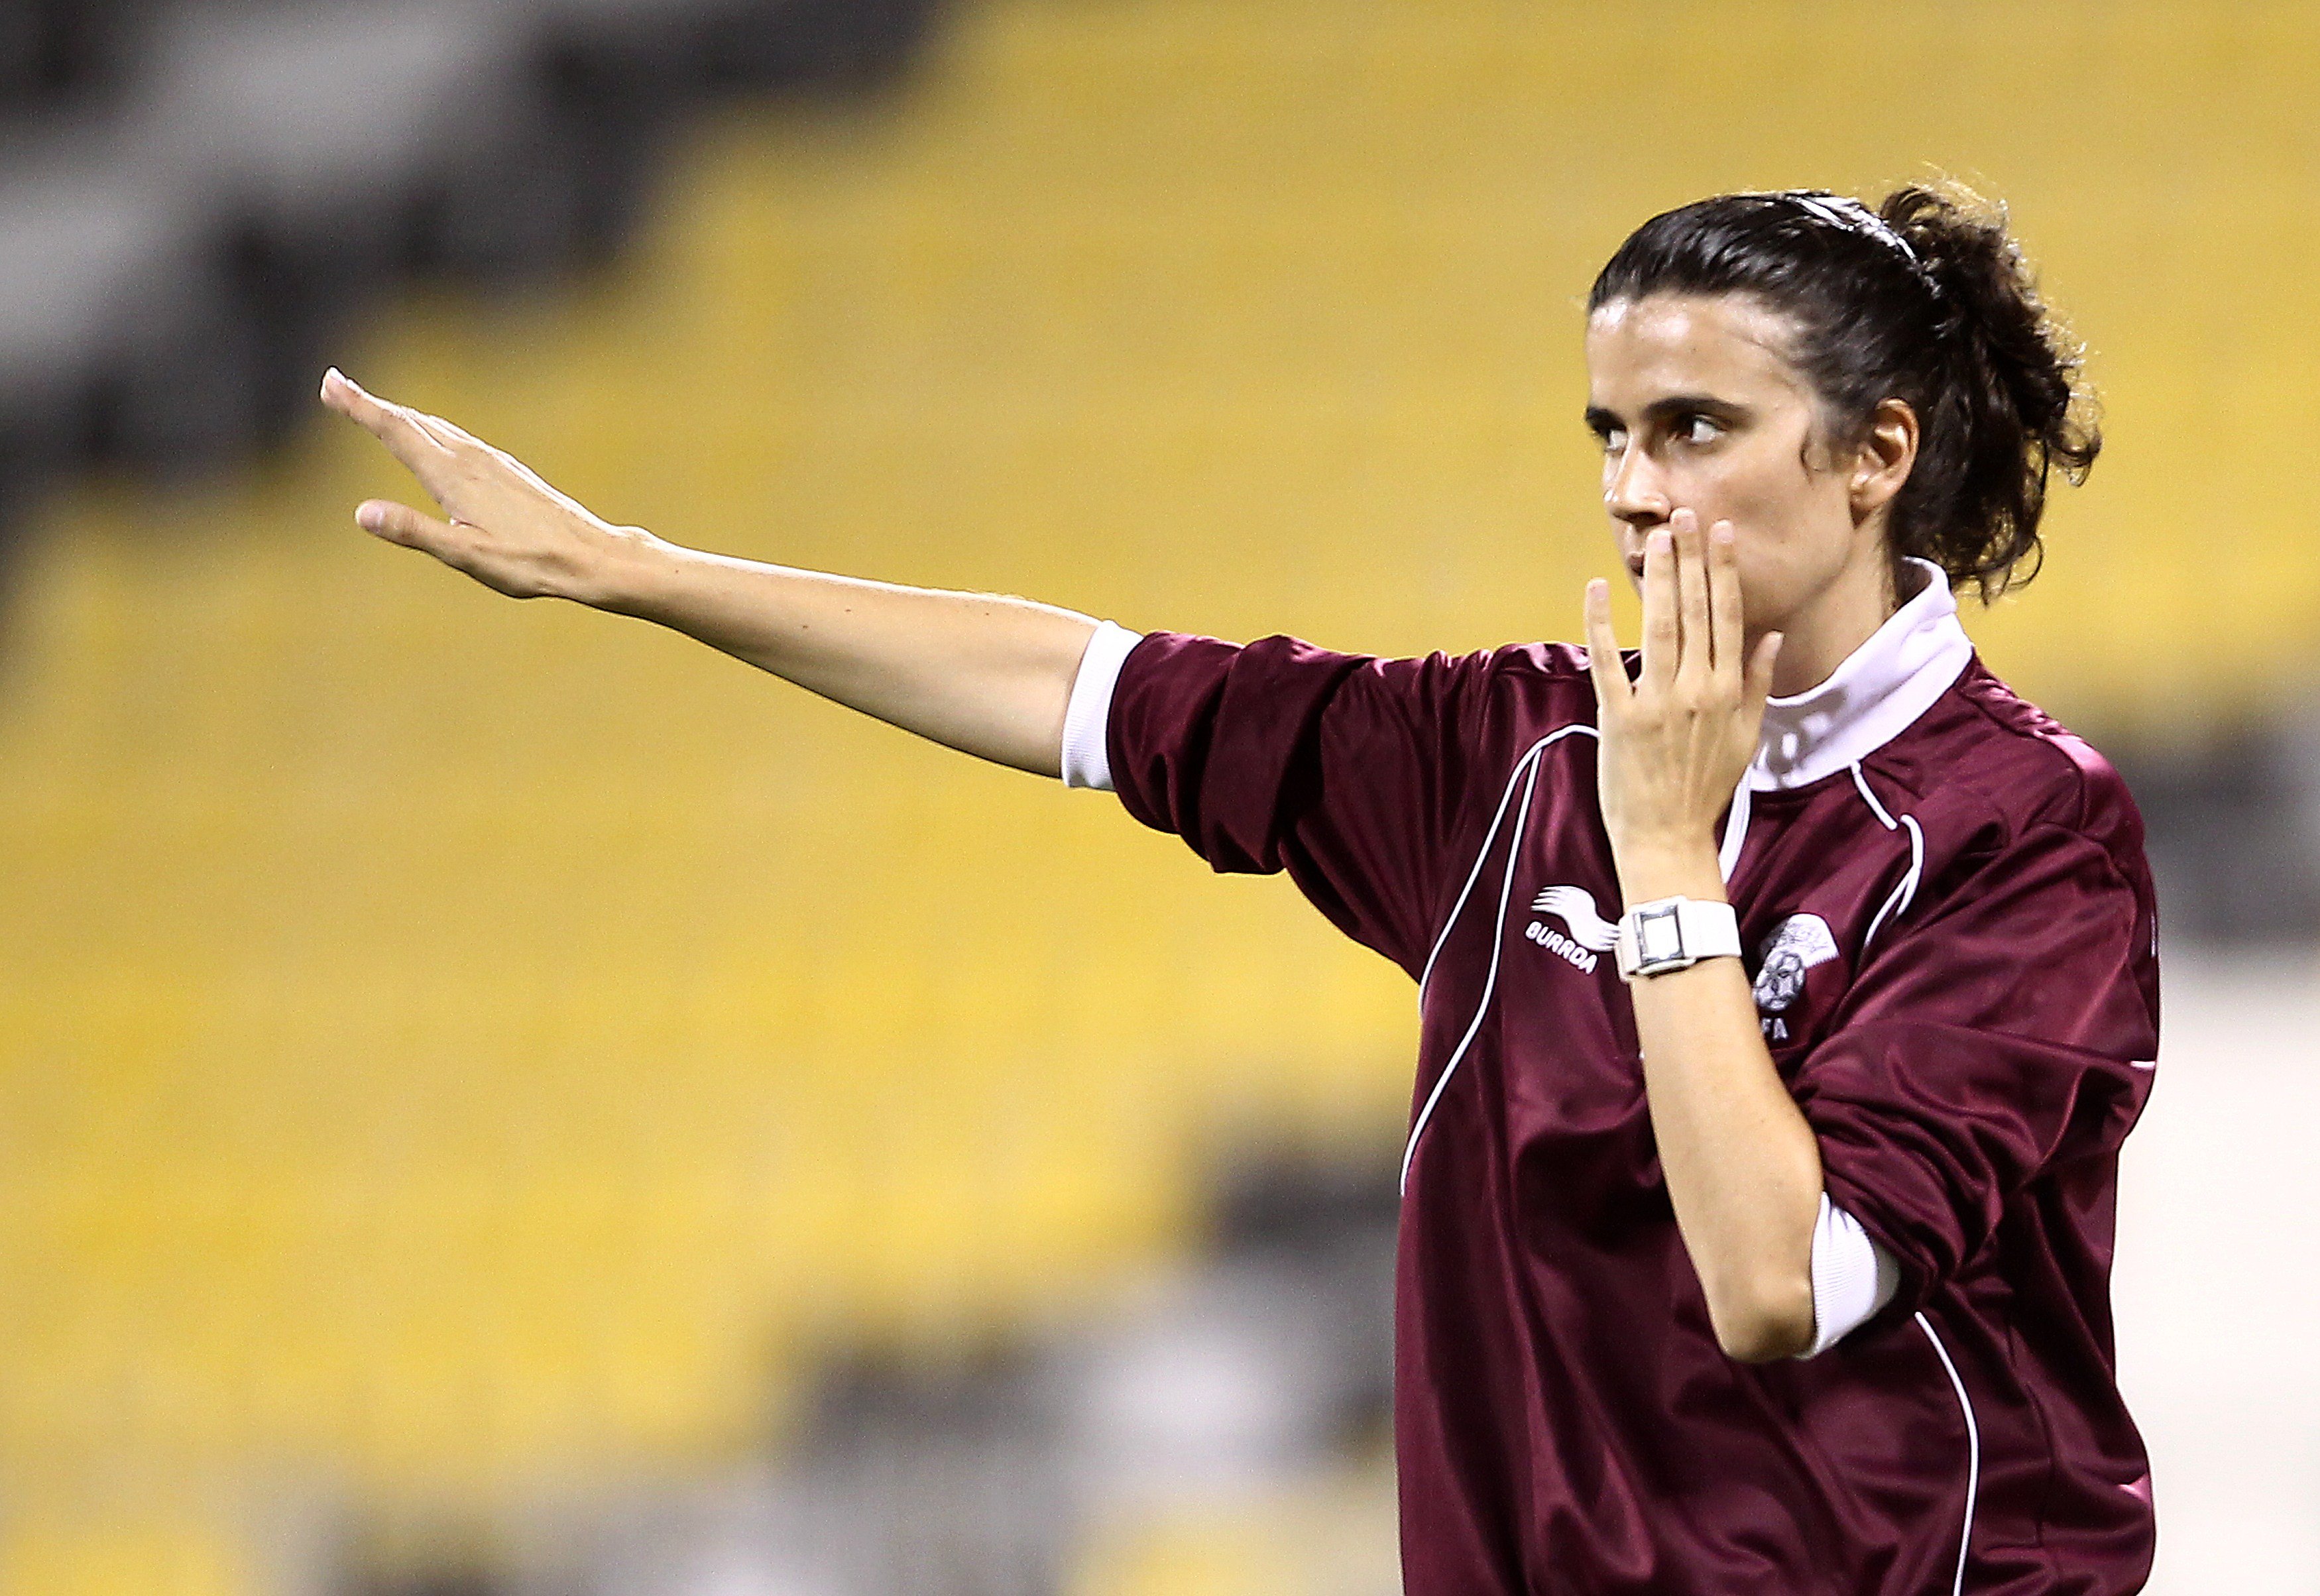 Portugal's Helena Costa in action as coach of Qatar's women football team on May 26, 2012. (Victor J. Blue for MSNBC)